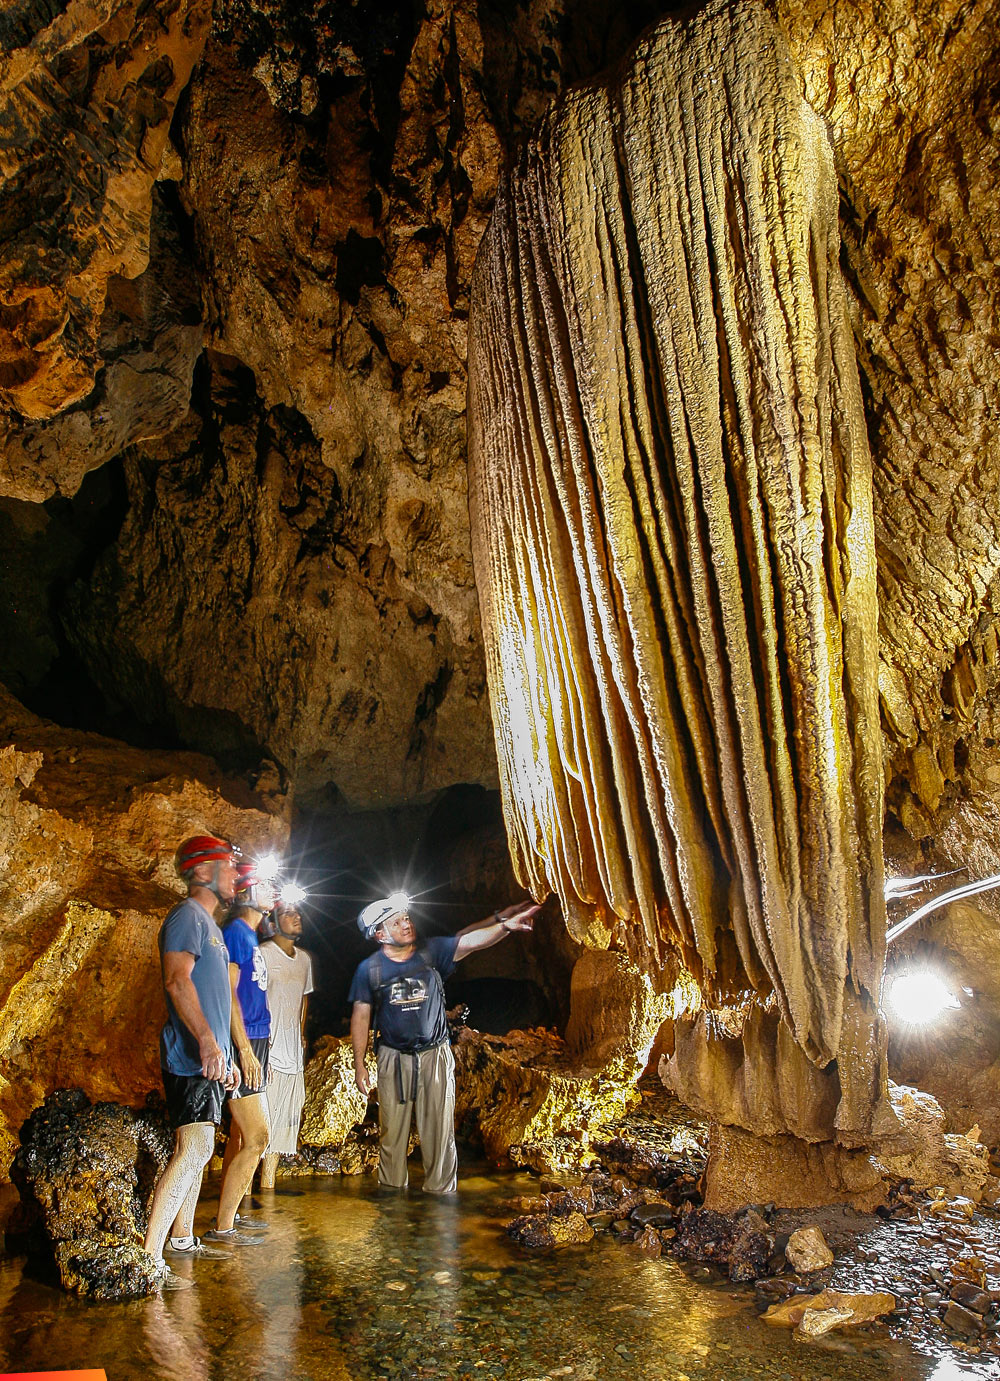 Actun Tunichil Muknal Cave: This magnificent cave is full of massive stalagmites and stalactites